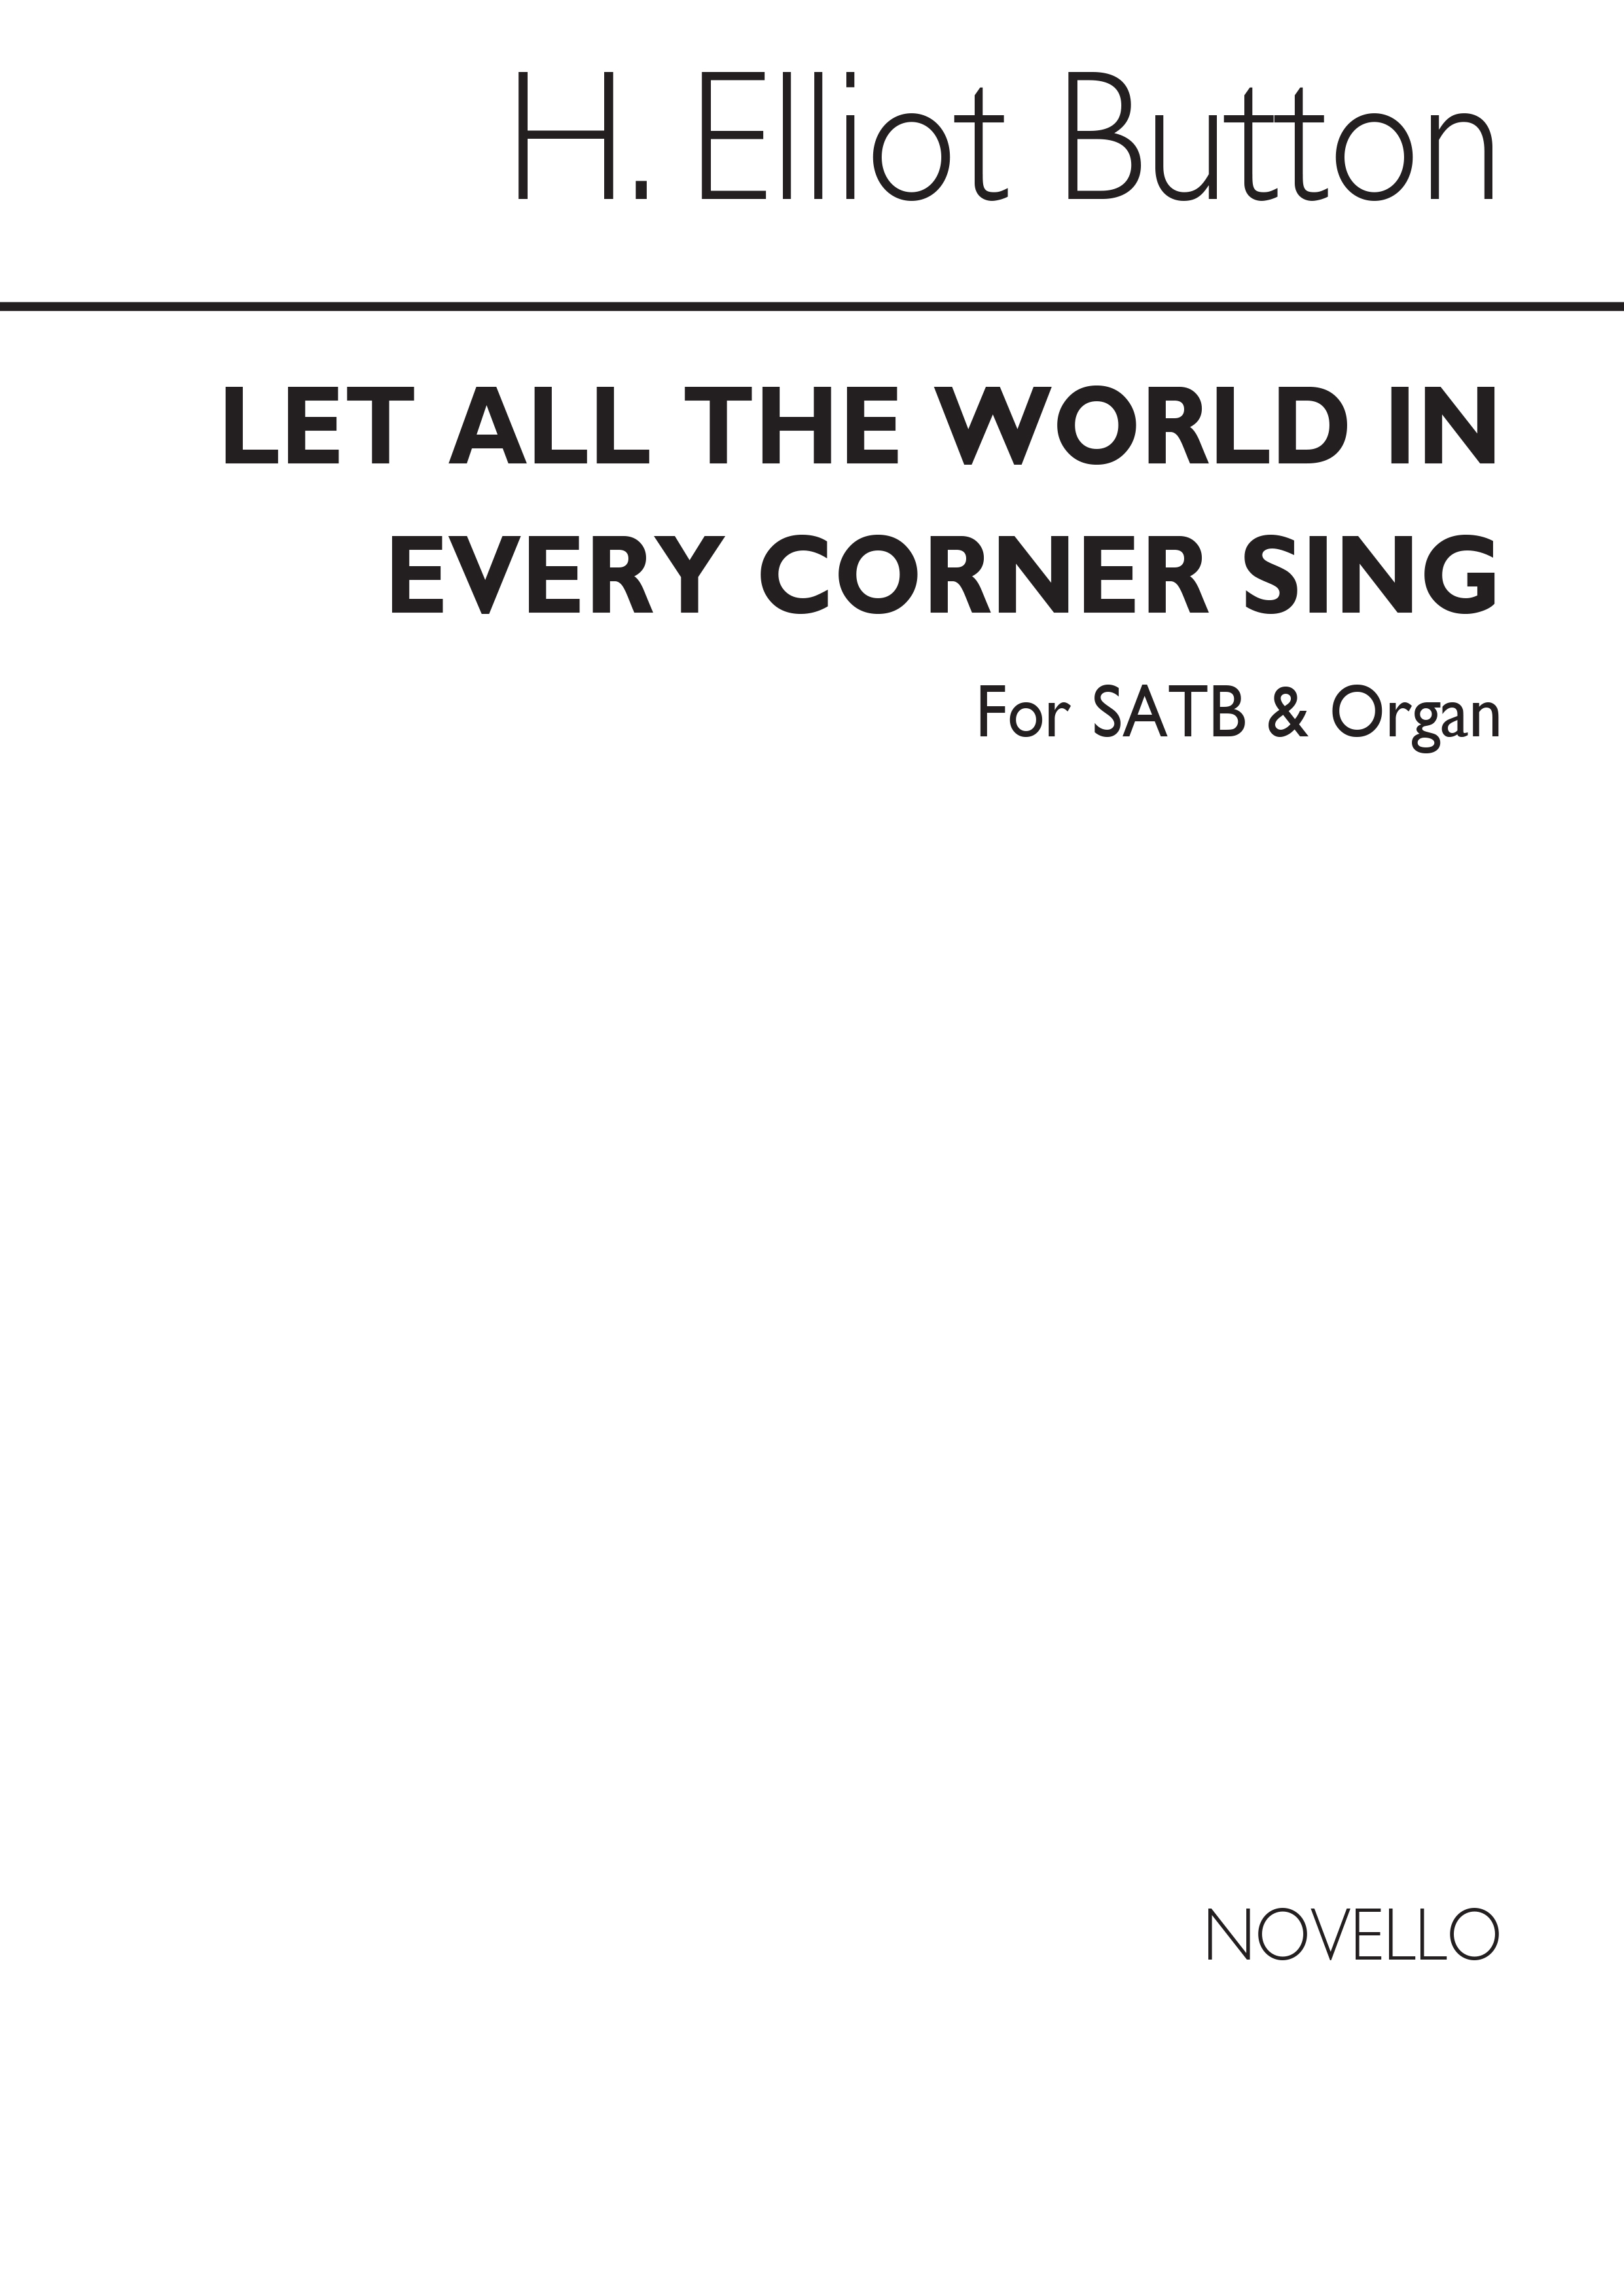 H. Elliot Button: Let All The World In Every Corner Sing (Hymn) Satb/Organ